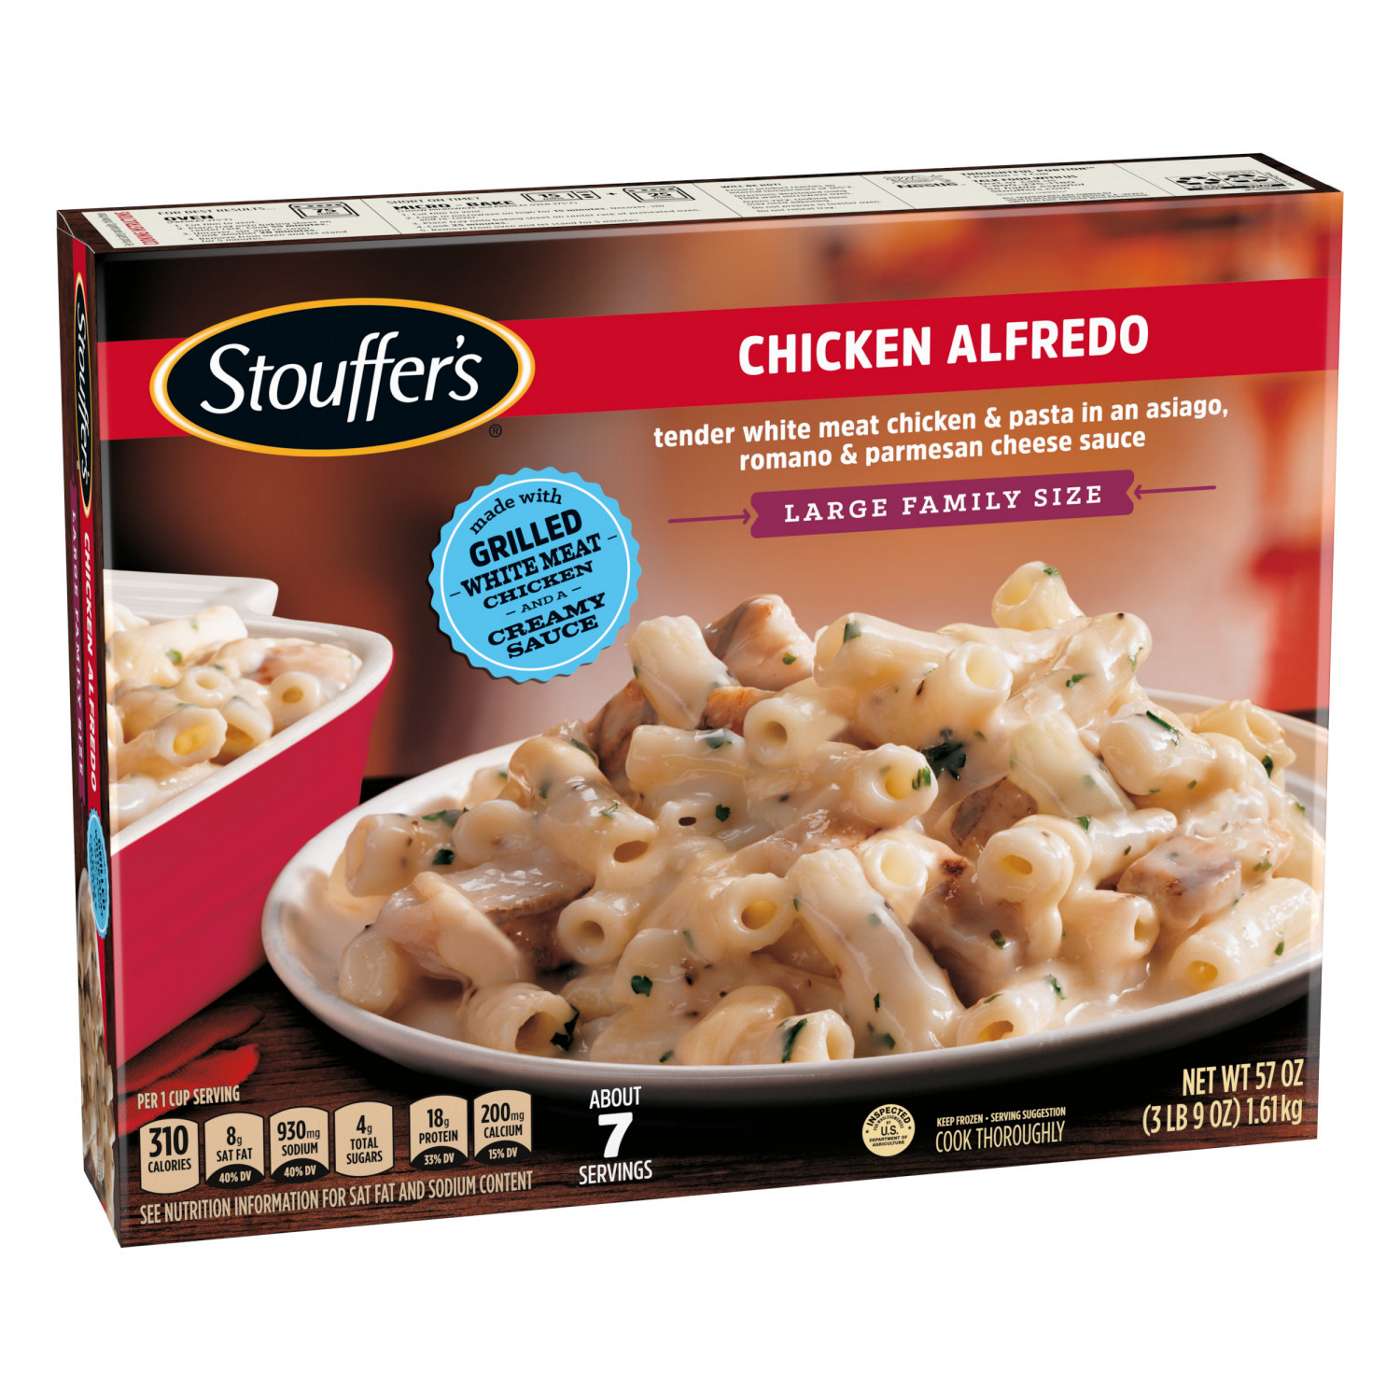 Stouffer's Frozen Chicken Alfredo - Large Family-Size; image 5 of 6